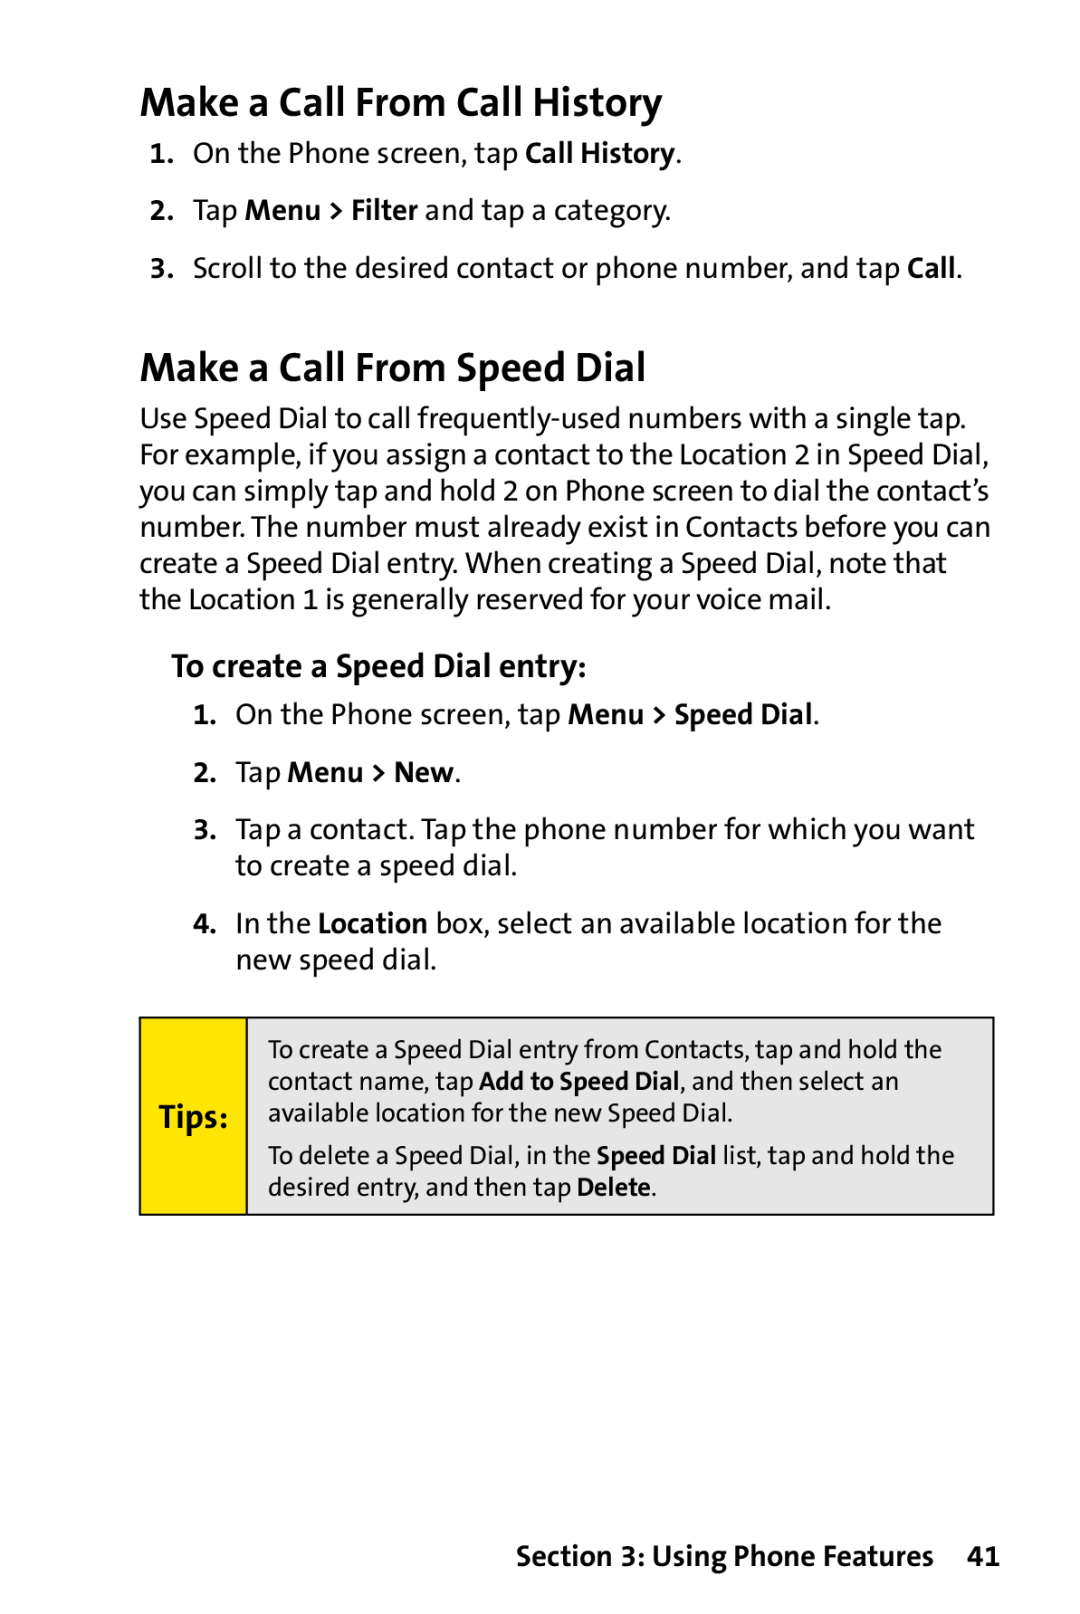 Sprint Nextel PPC-6700 Make a Call From Call History, Make a Call From Speed Dial, To create a Speed Dial entry, Tips 